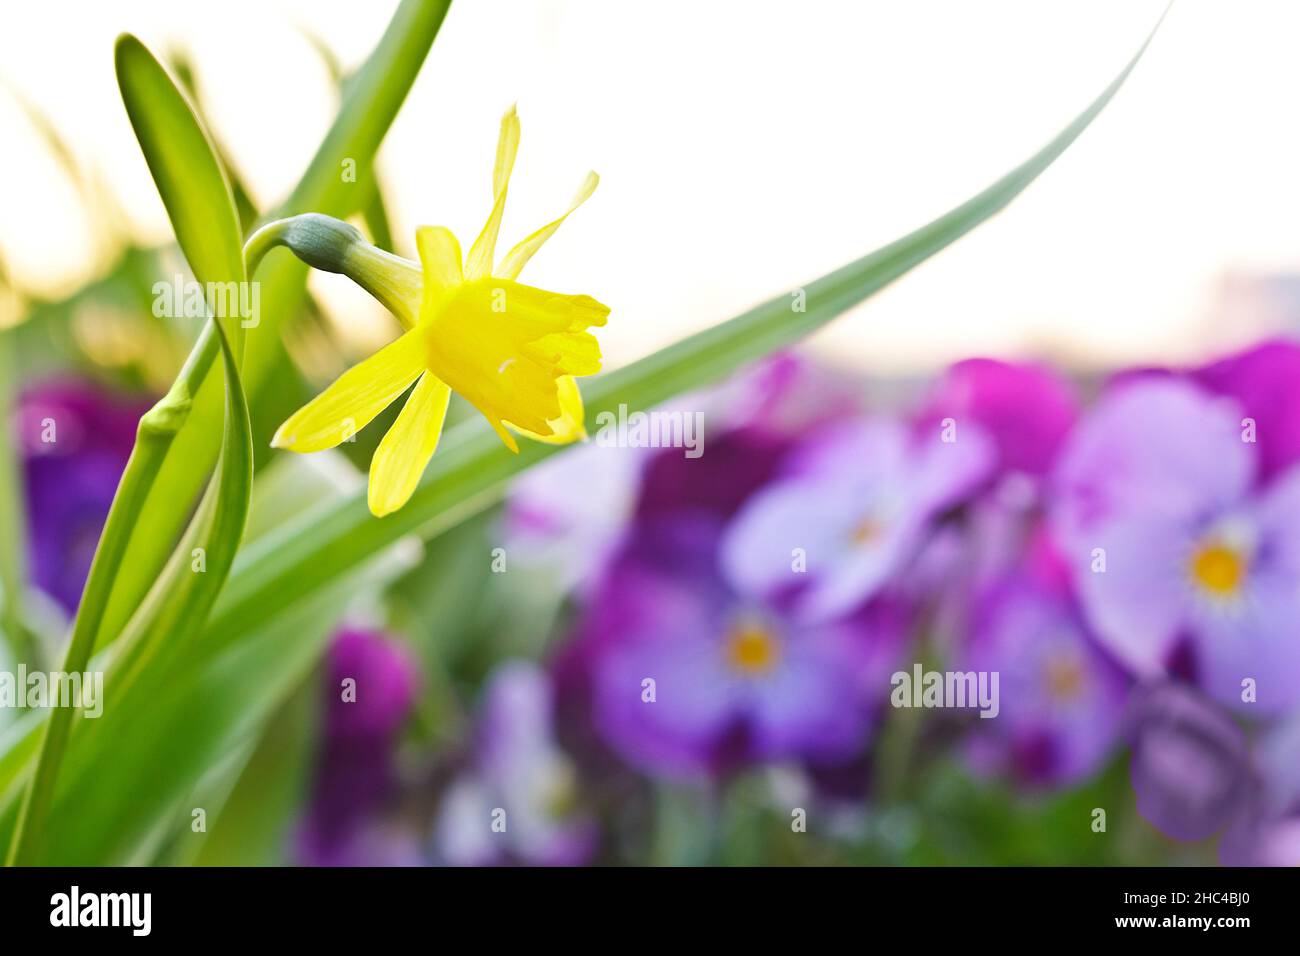 Closeup of small yellow daffodils in full bloom and purple pansy flowers in the morning sun, spring background texture. Stock Photo